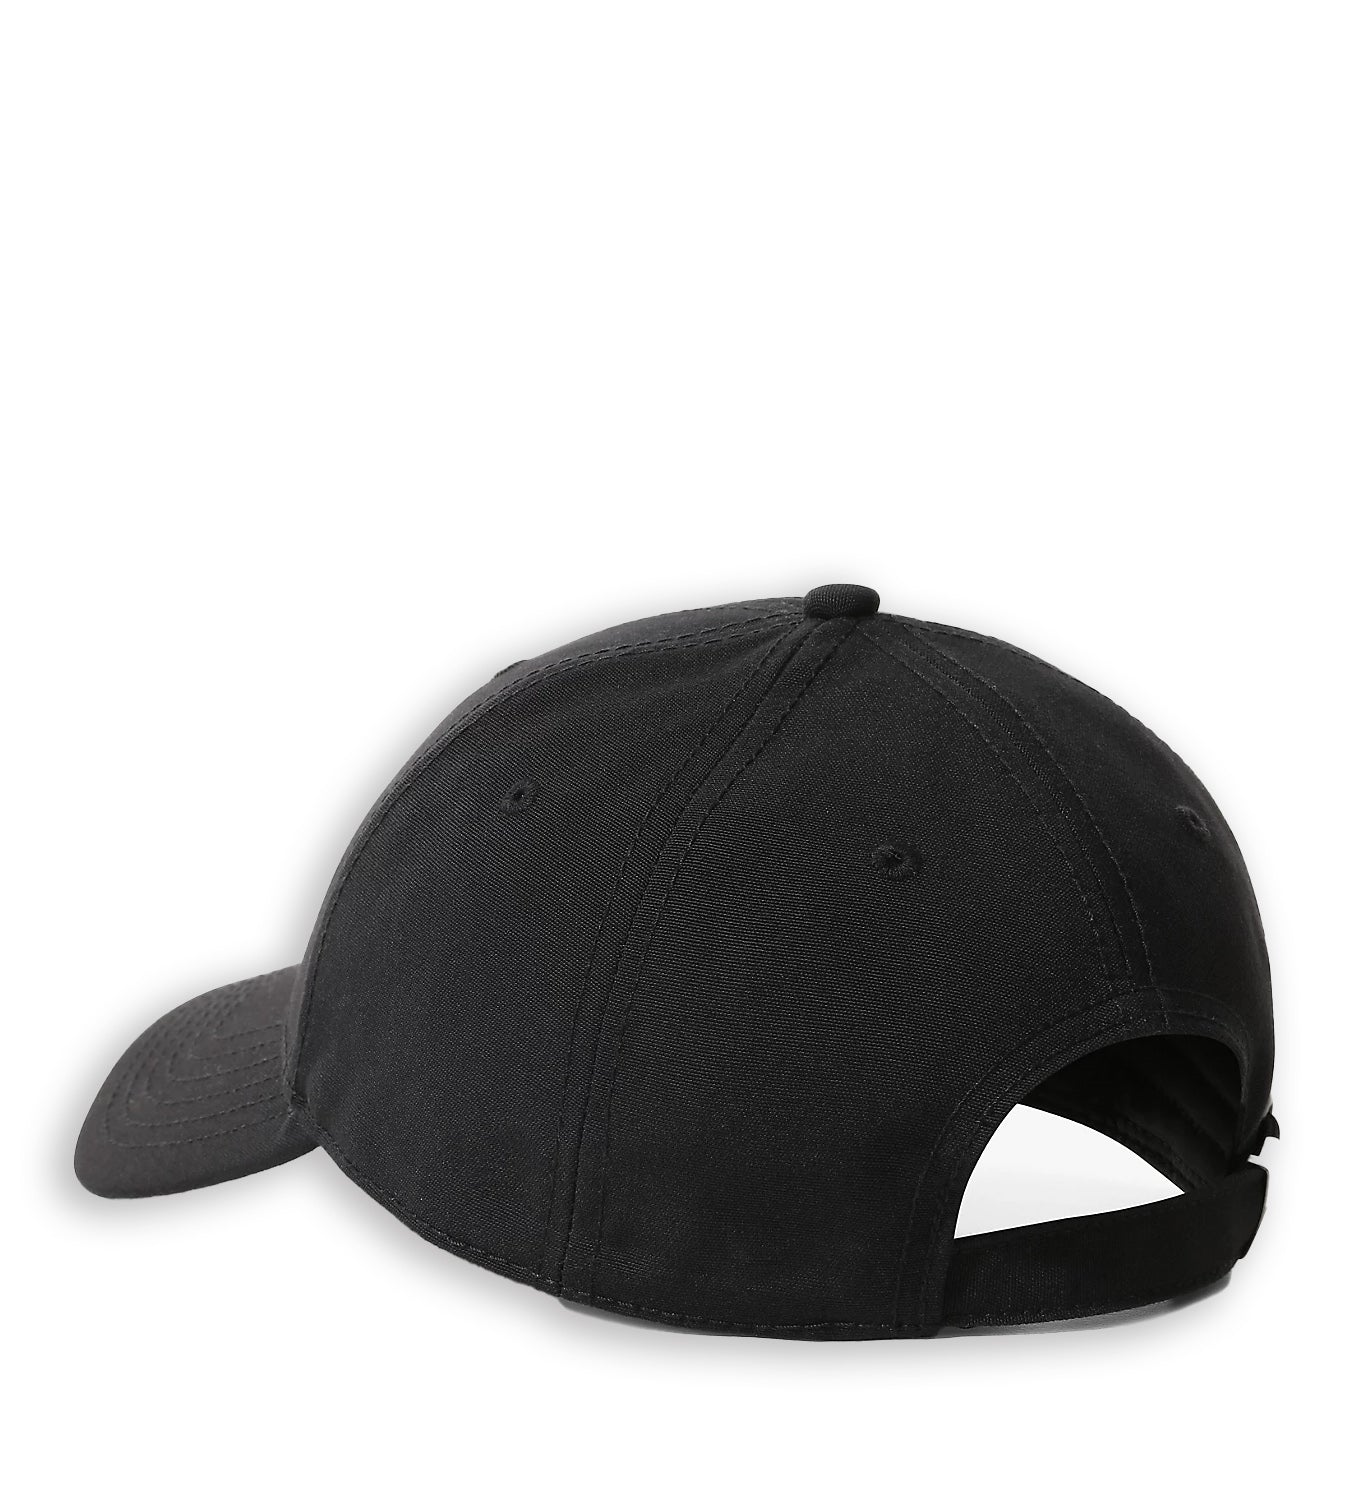 The North Face Recycled 66 Classic Hat Nero